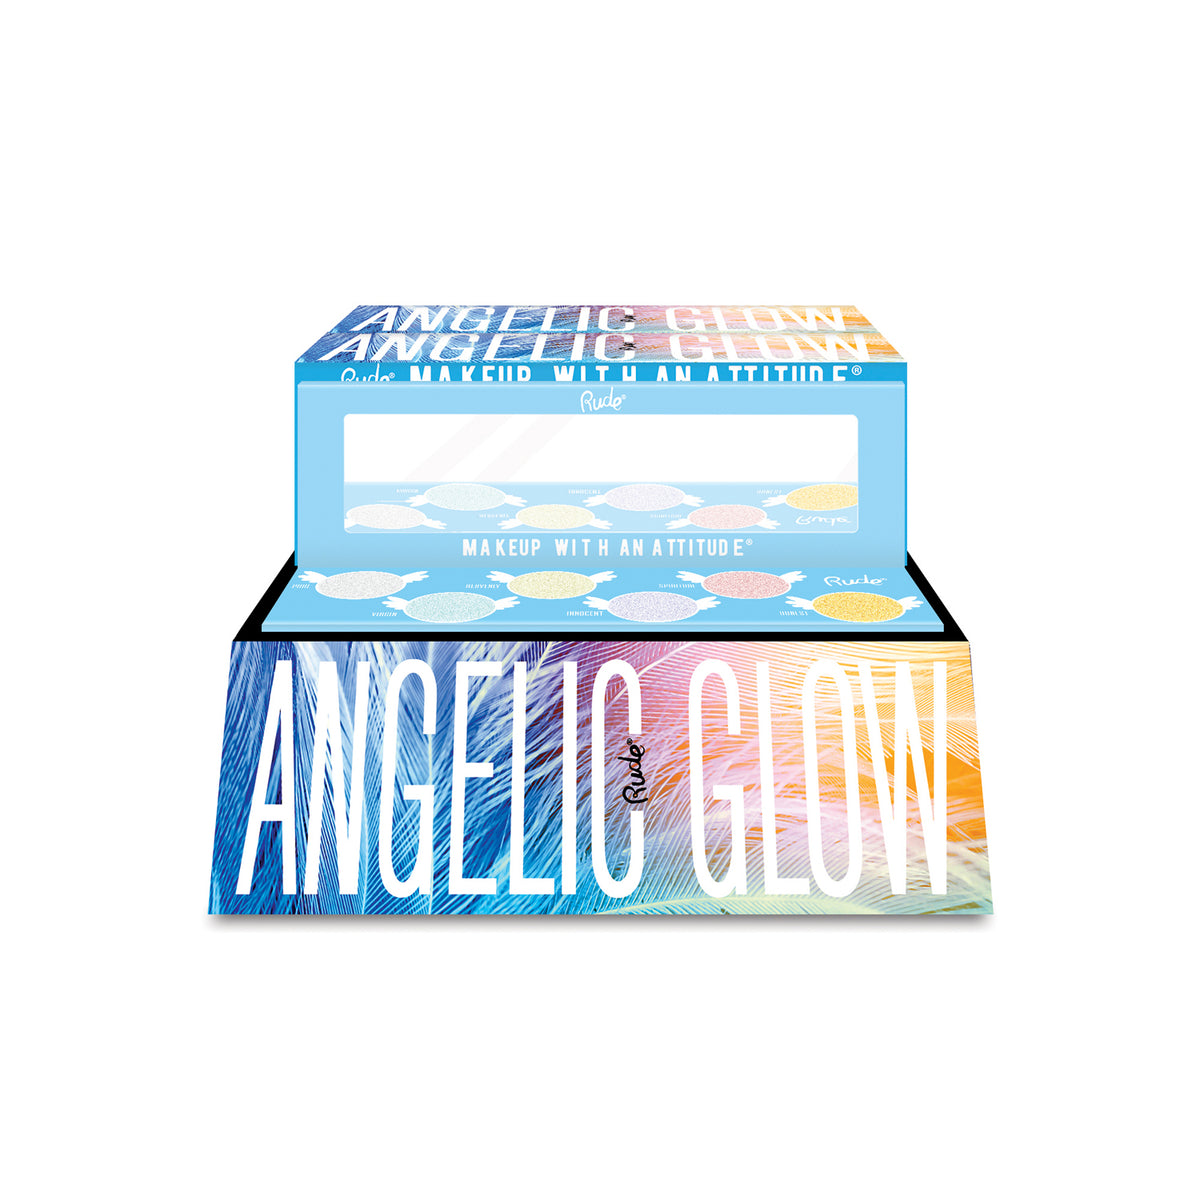 Angelic Glow Highlighter and Eyeshadow Palette Display Set, 24 pcs